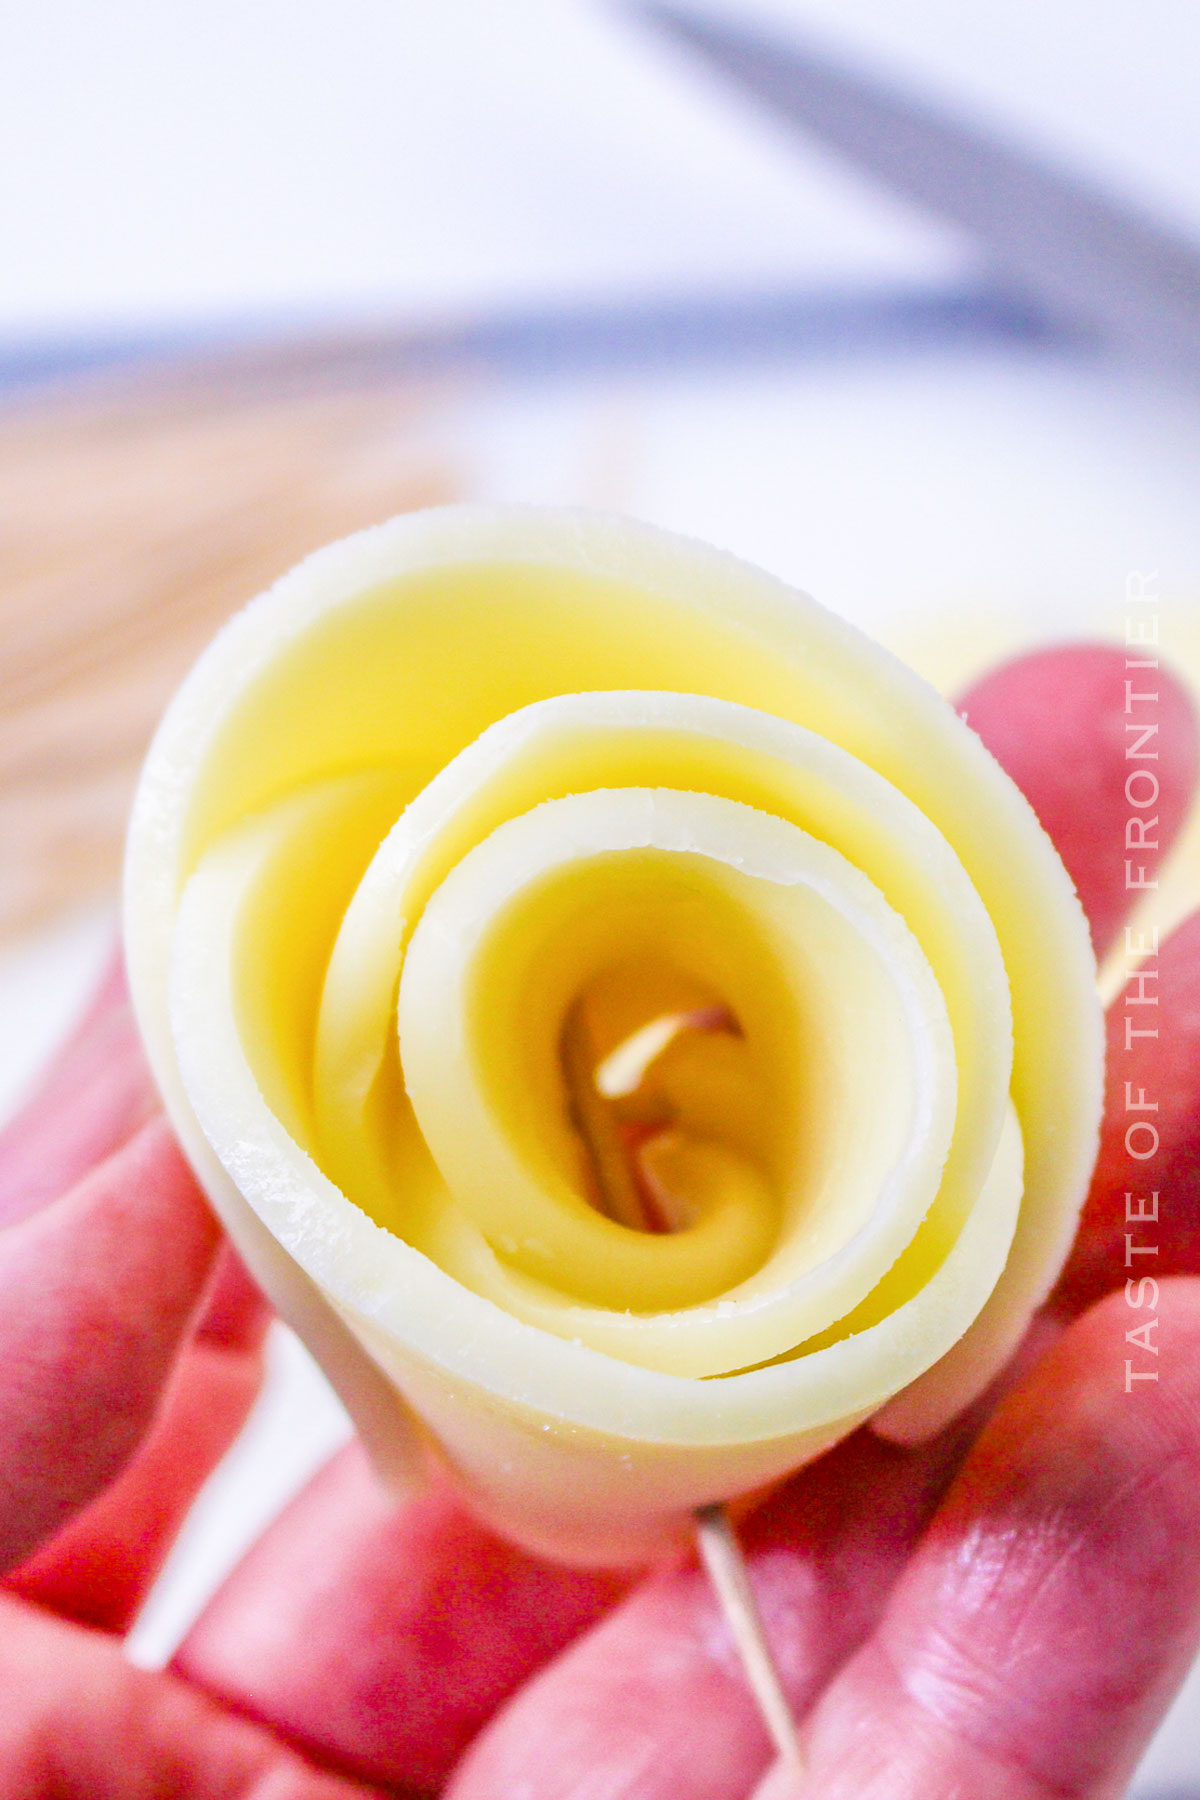 making roses out of cheese